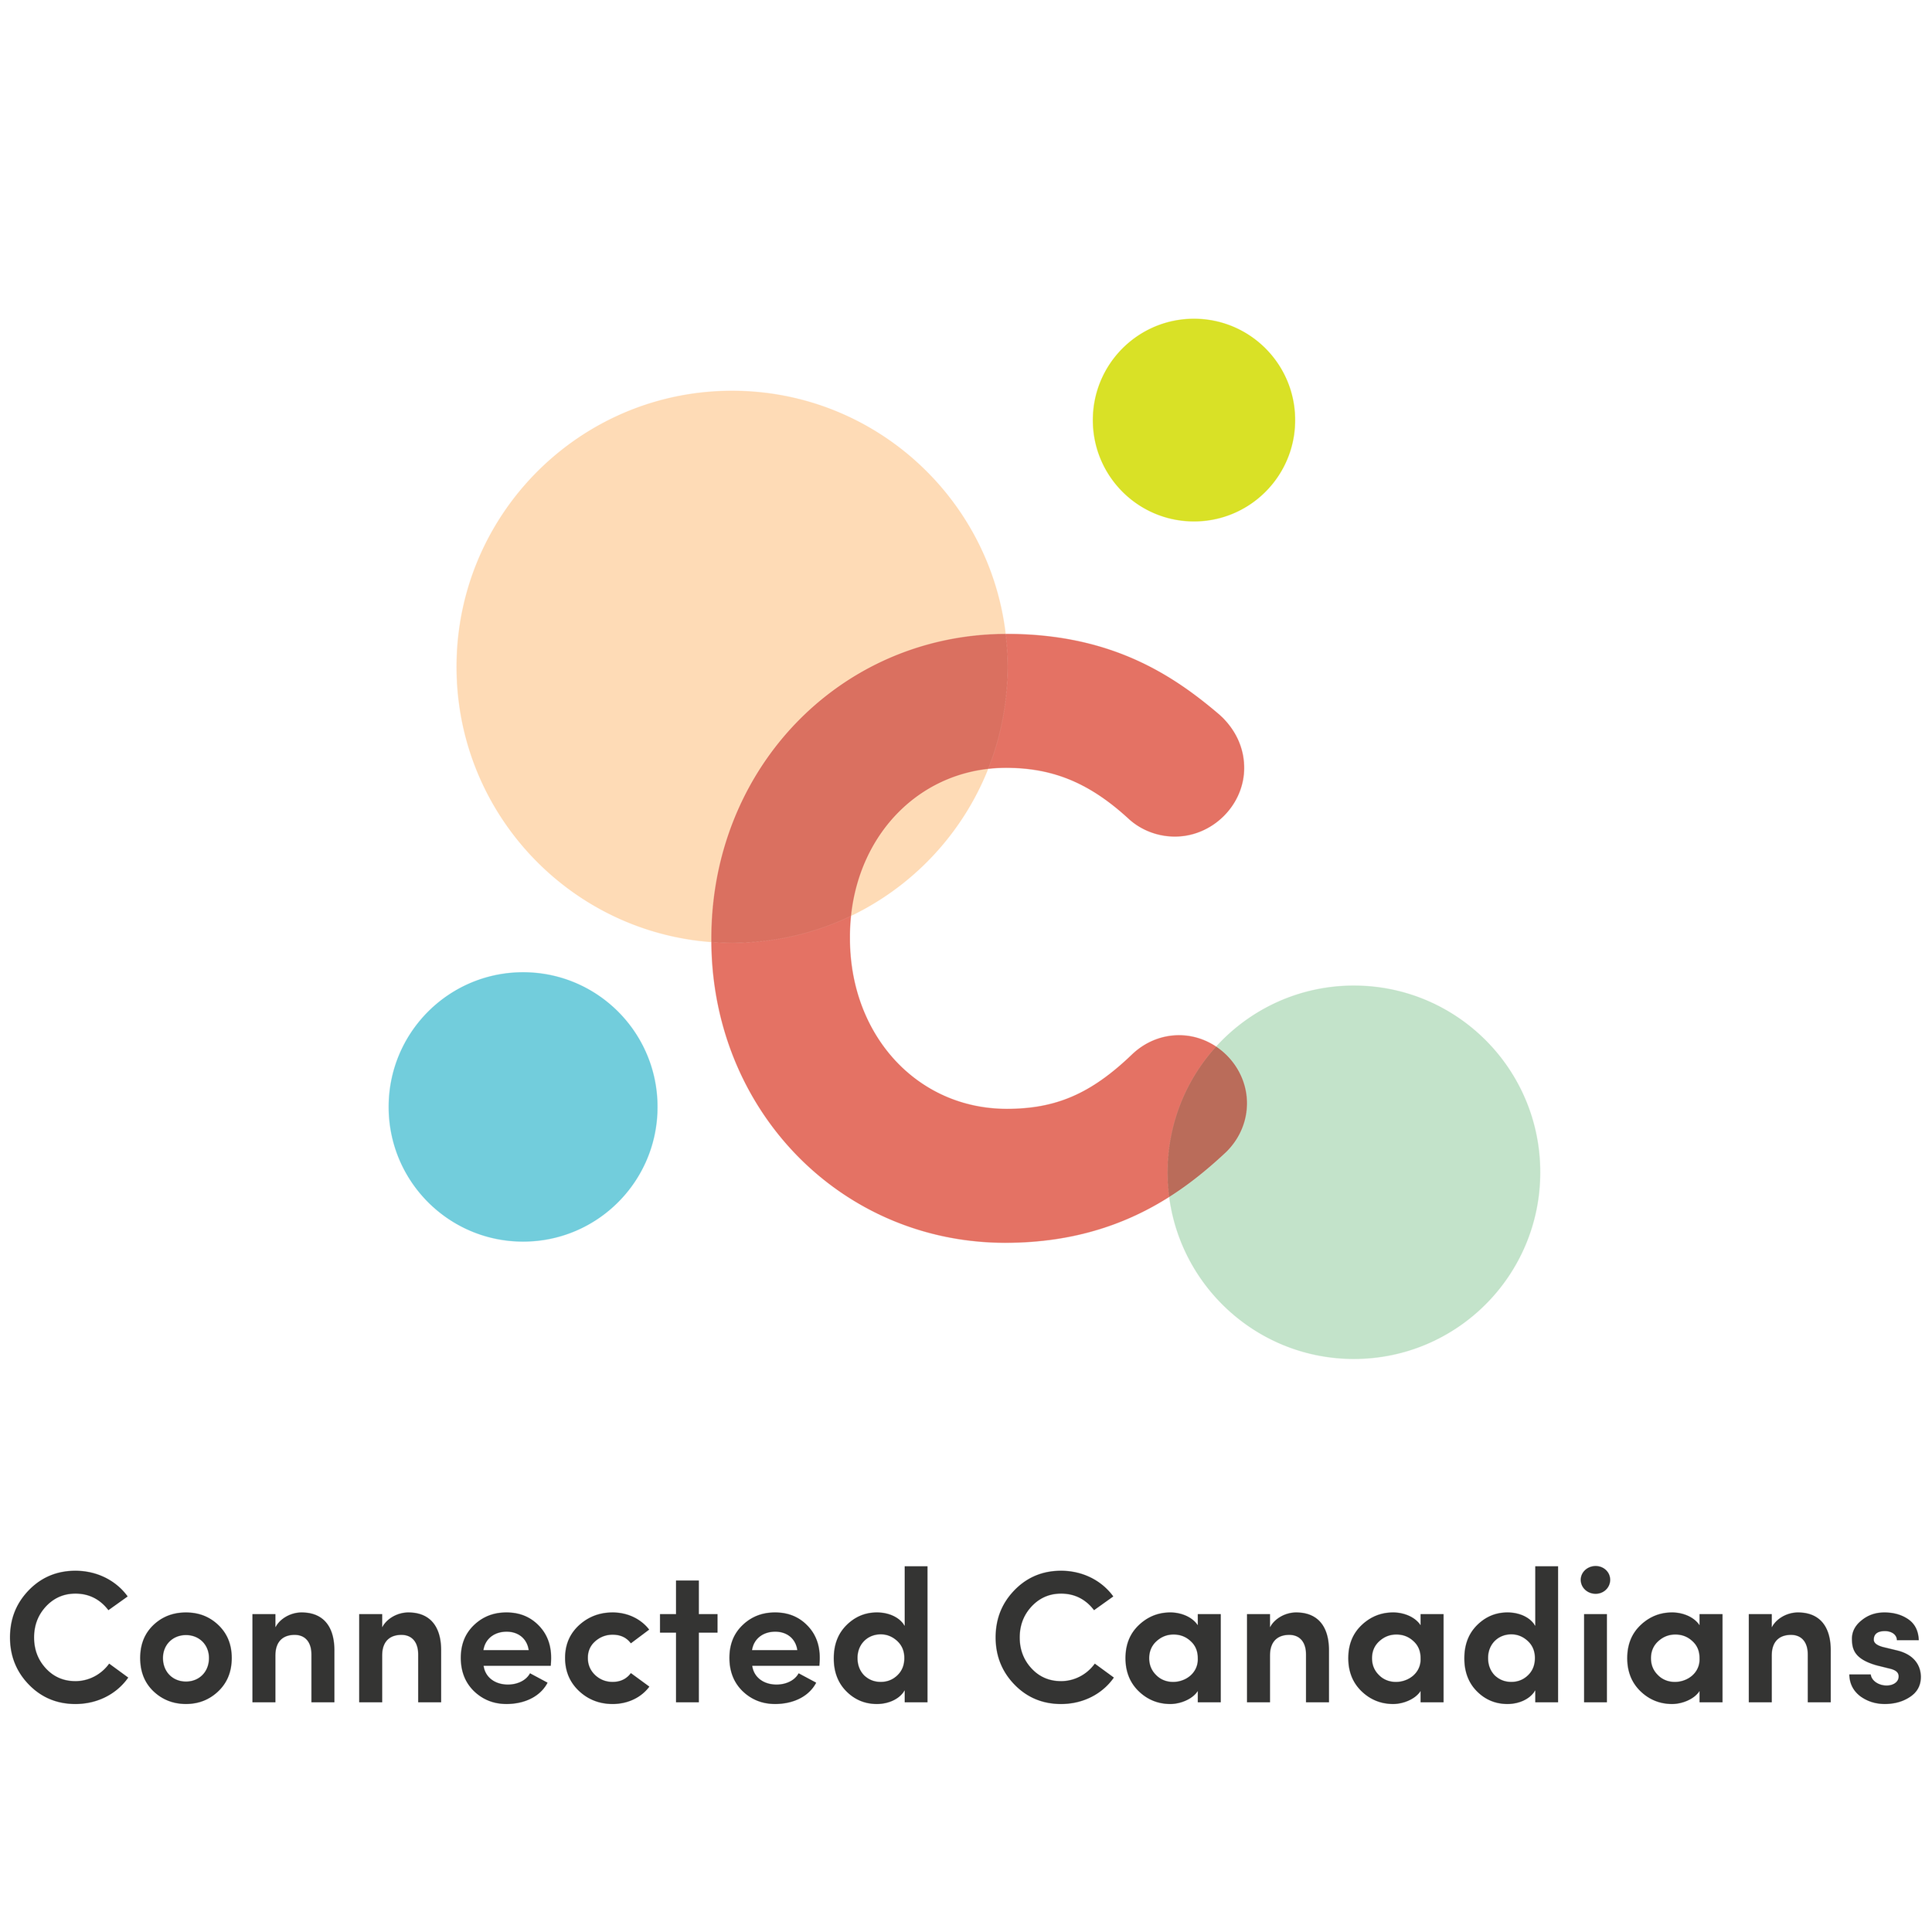 Connected Canadians